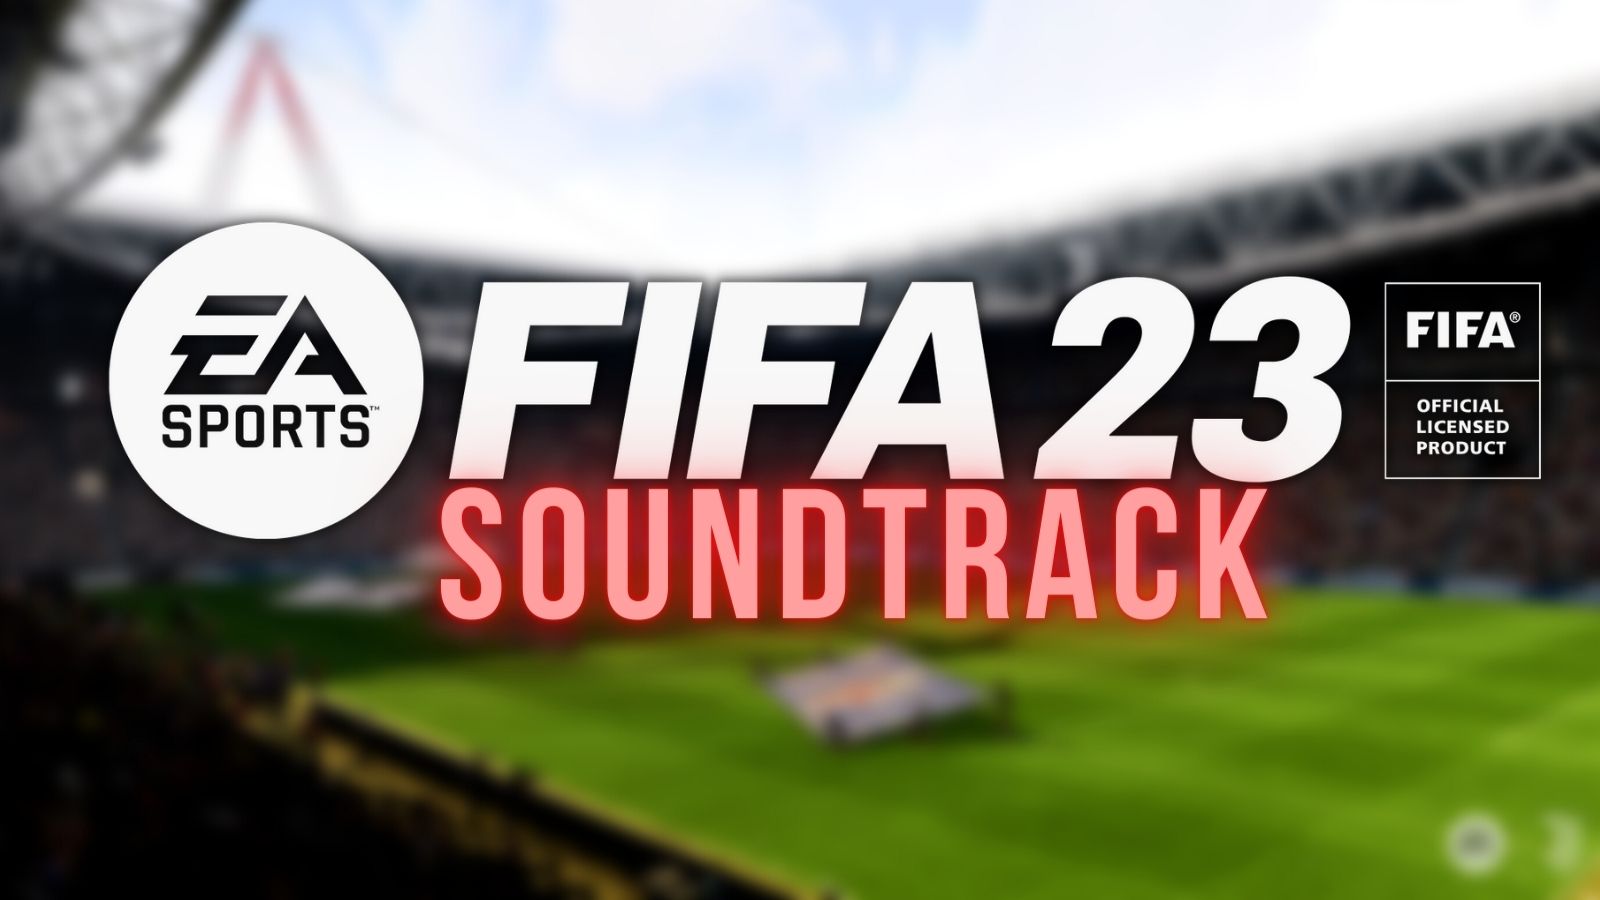 FIFA 23 soundtrack revealed: Bad Bunny, Denzel Curry, Labrinth, more